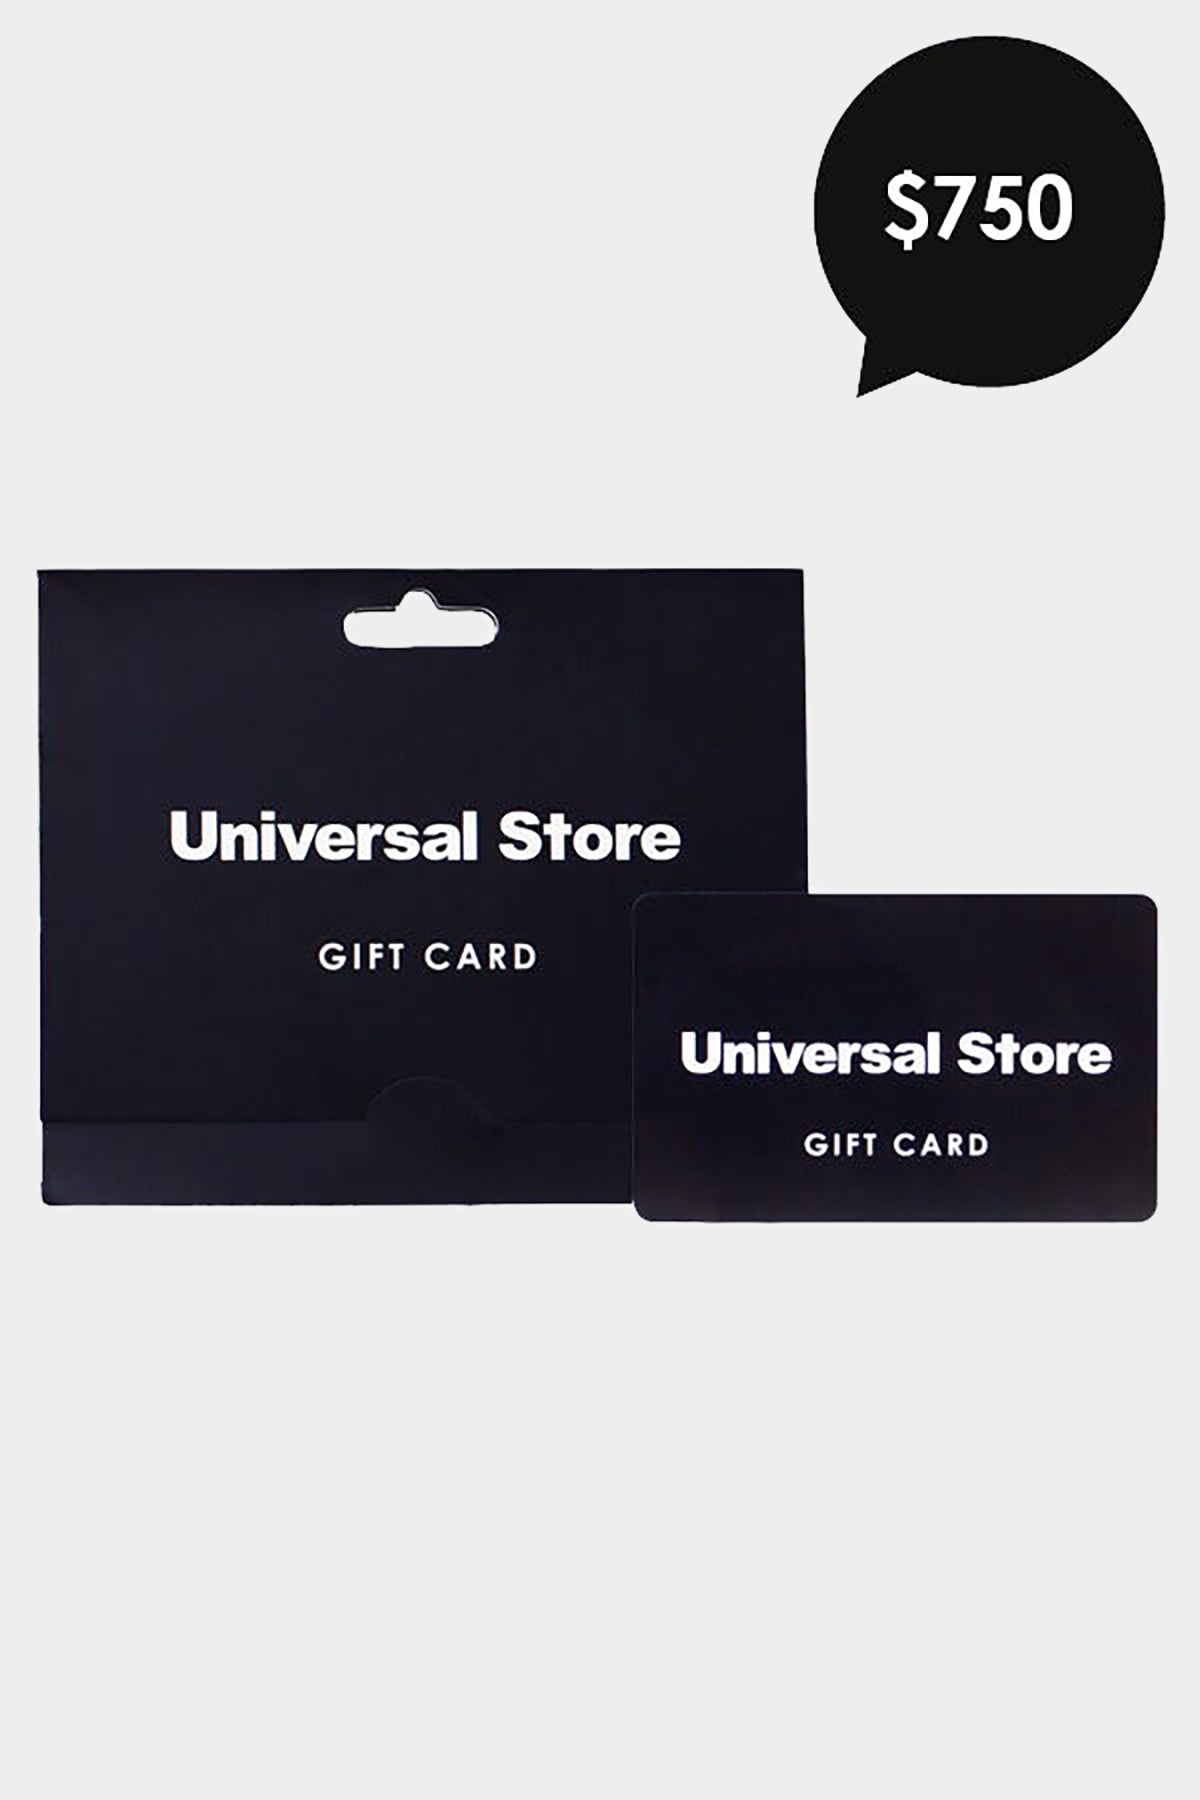 Universal Store $750 Gift Card